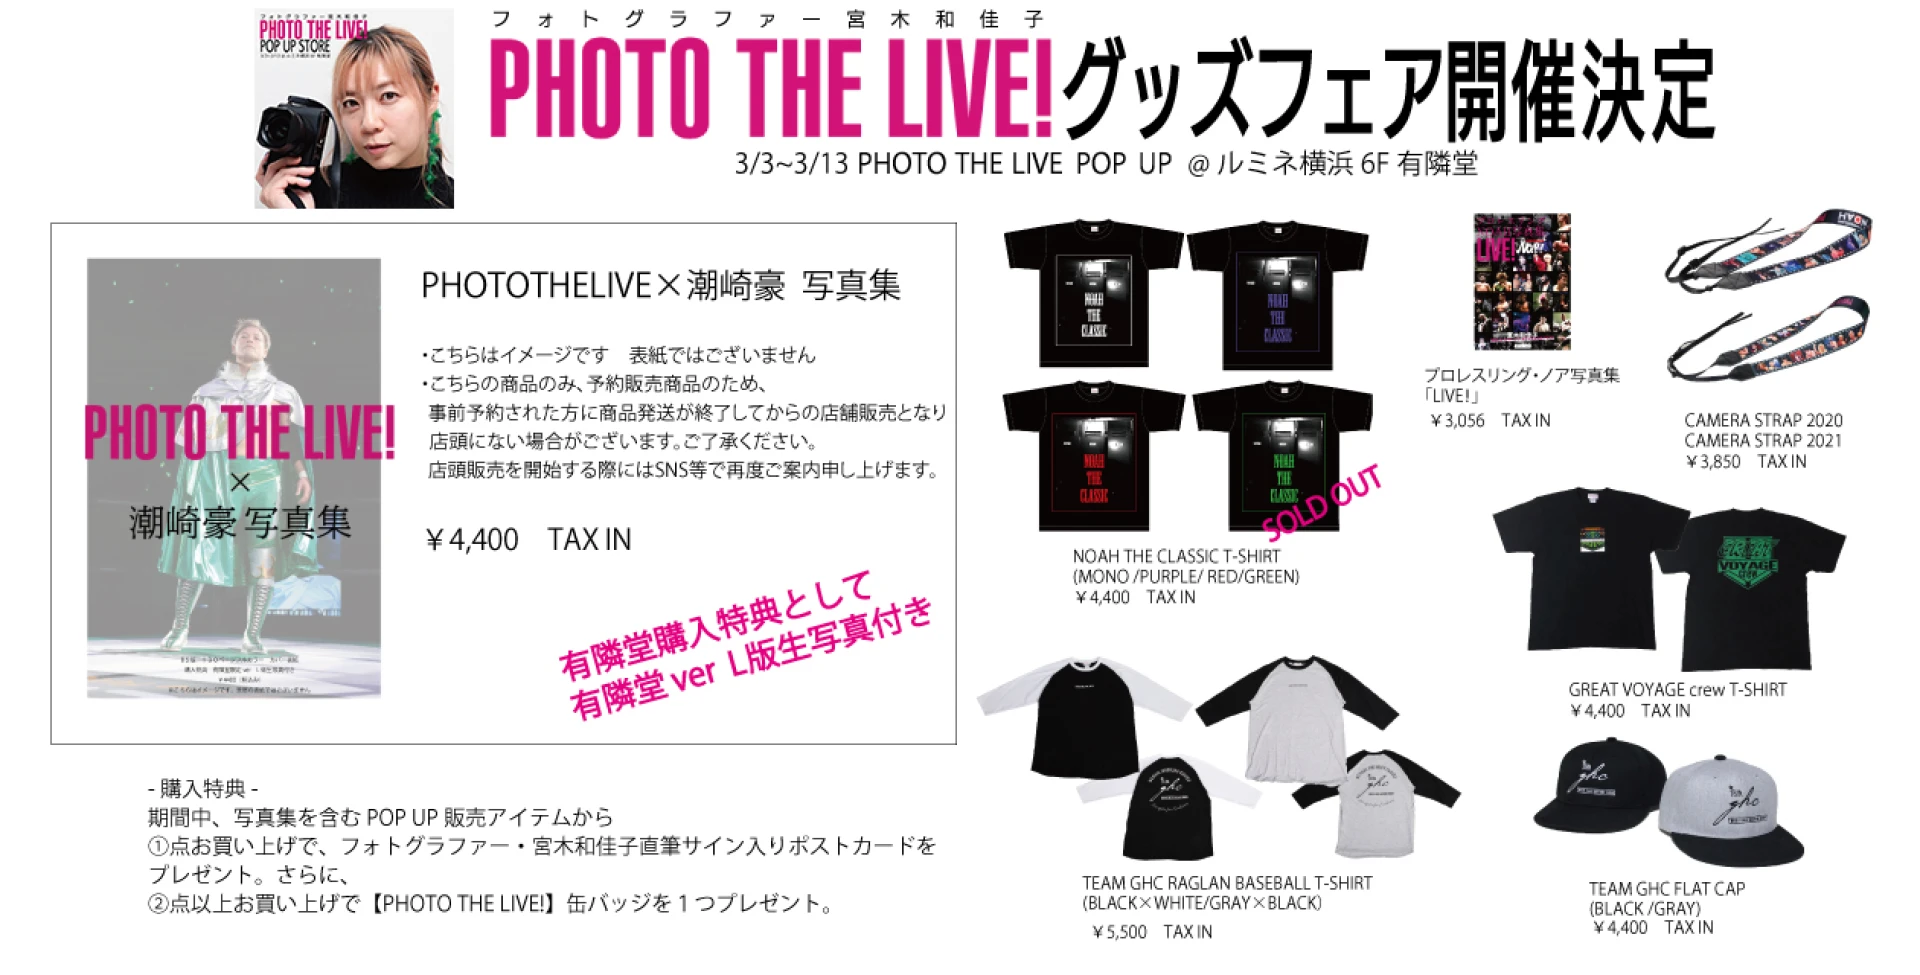 PHOTO THE LIVE! グッズフェア開催決定!!